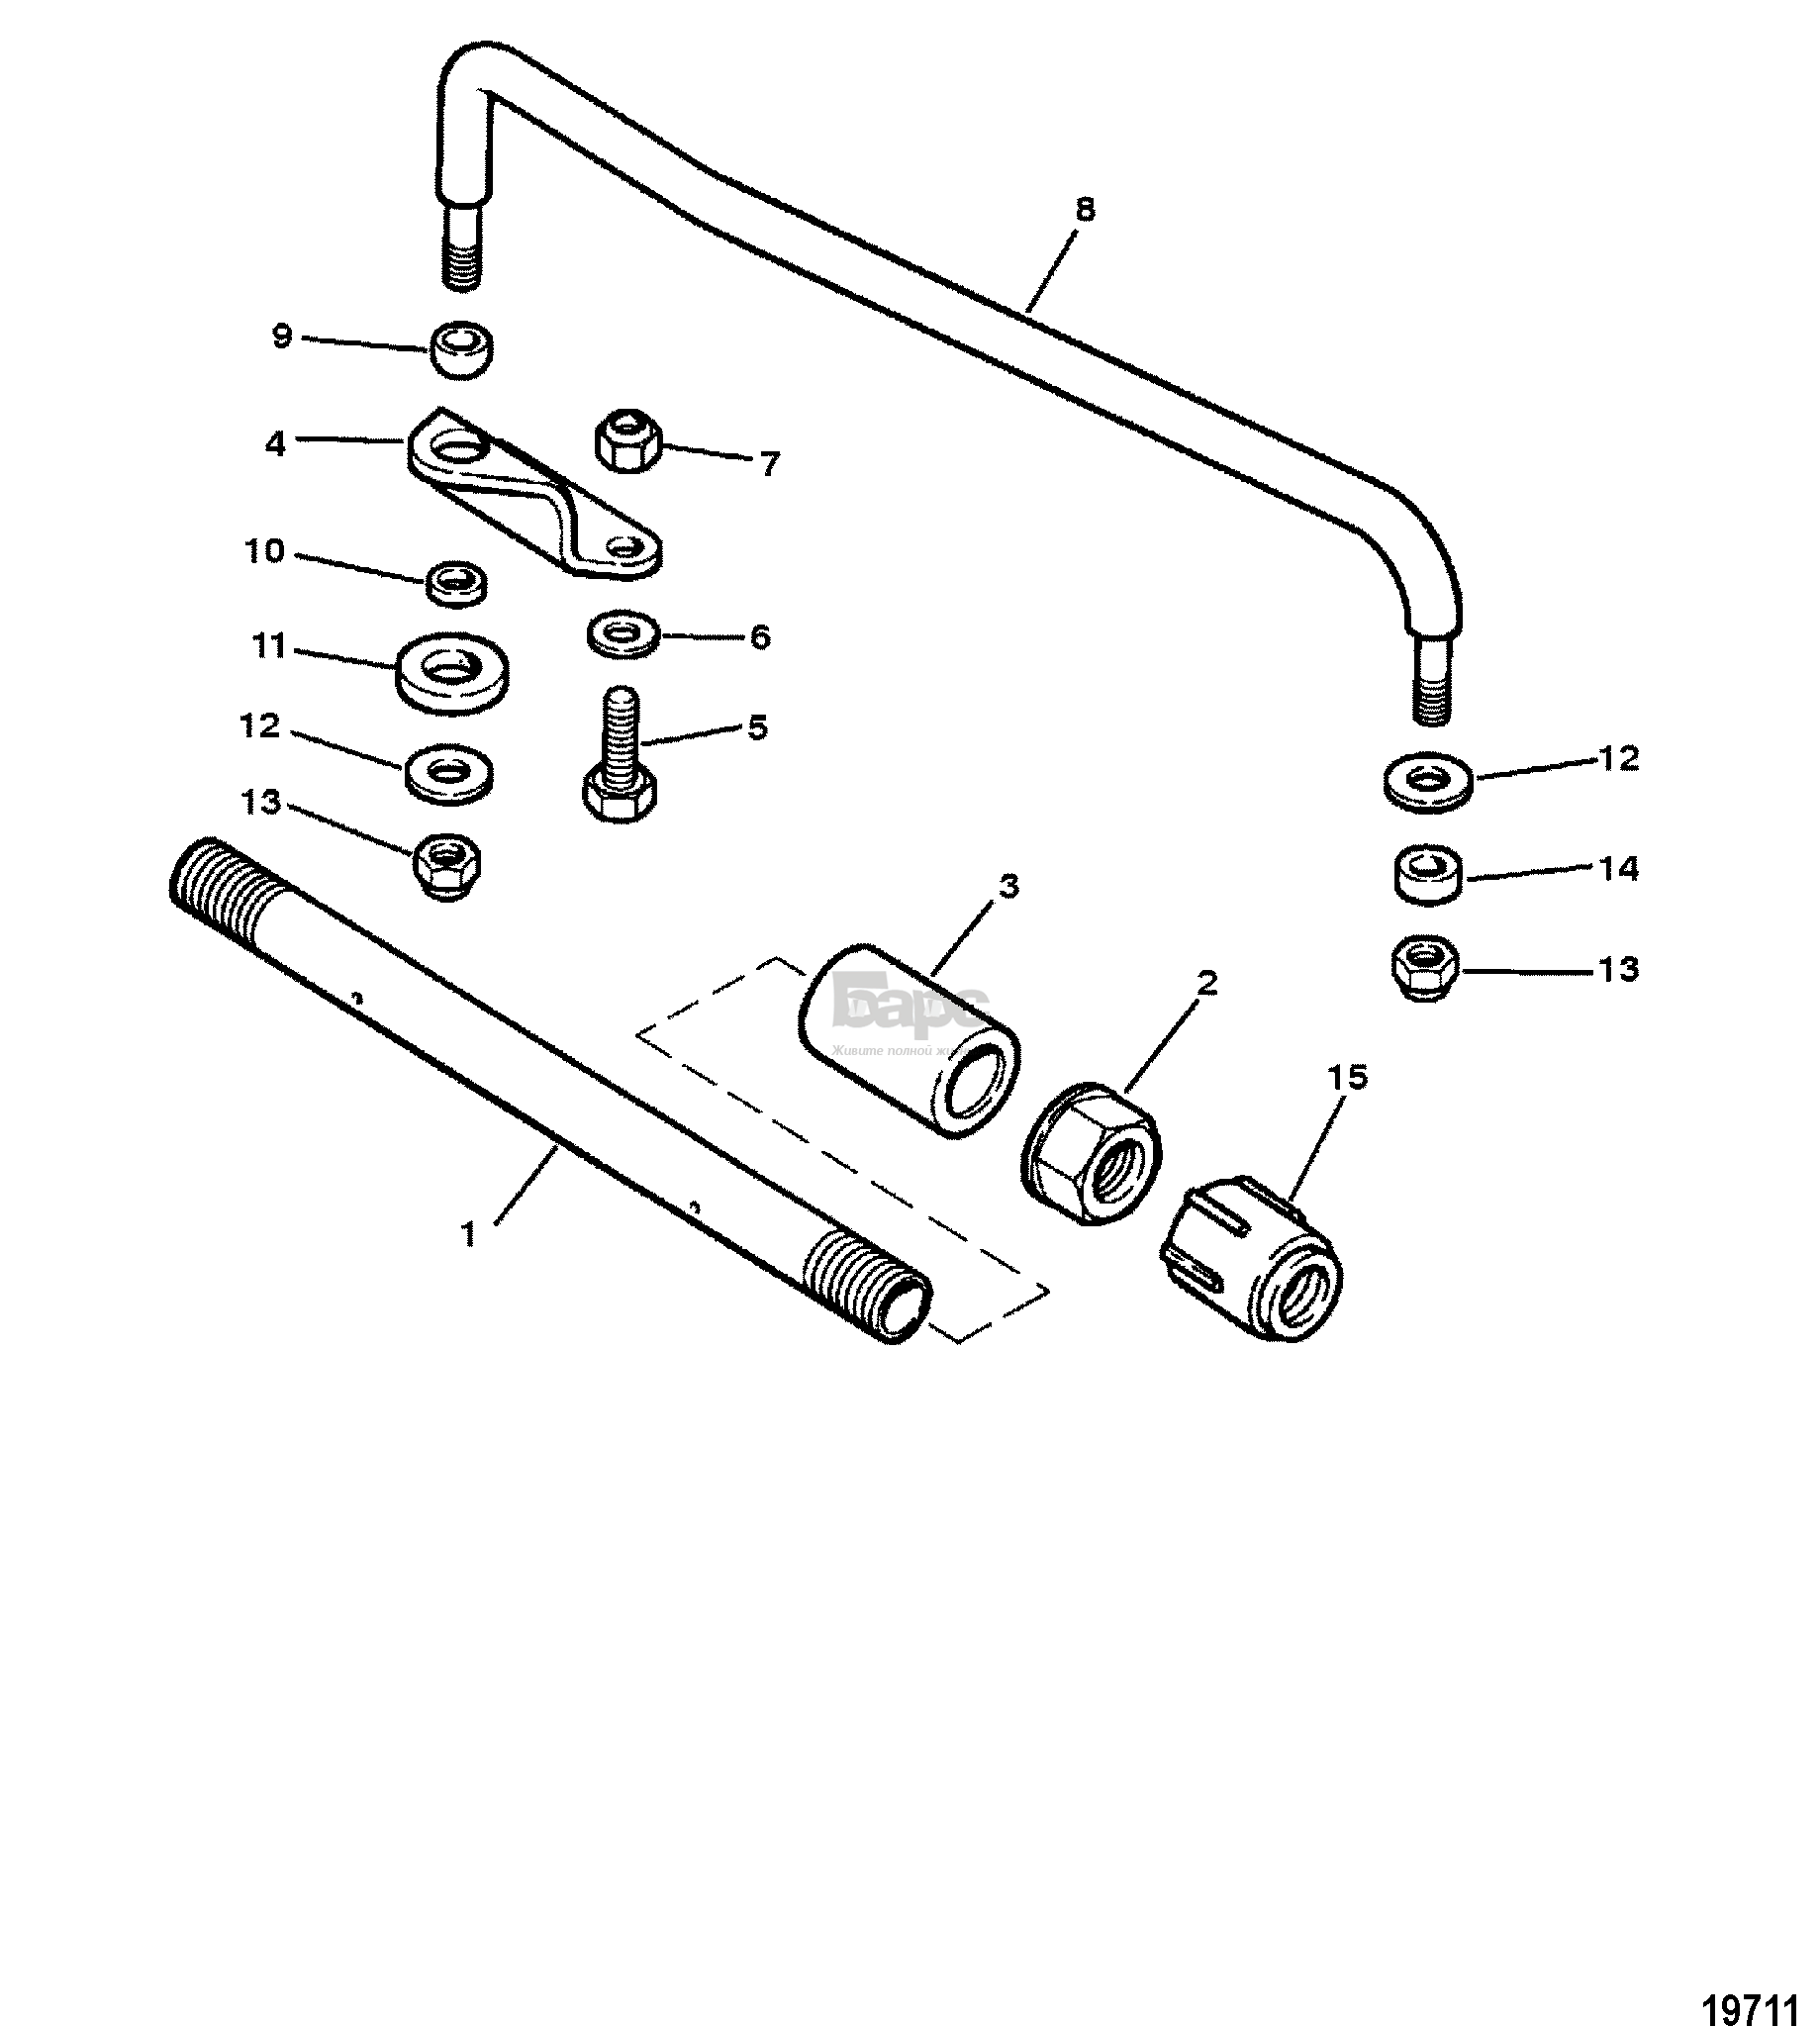 Link Rod and Components